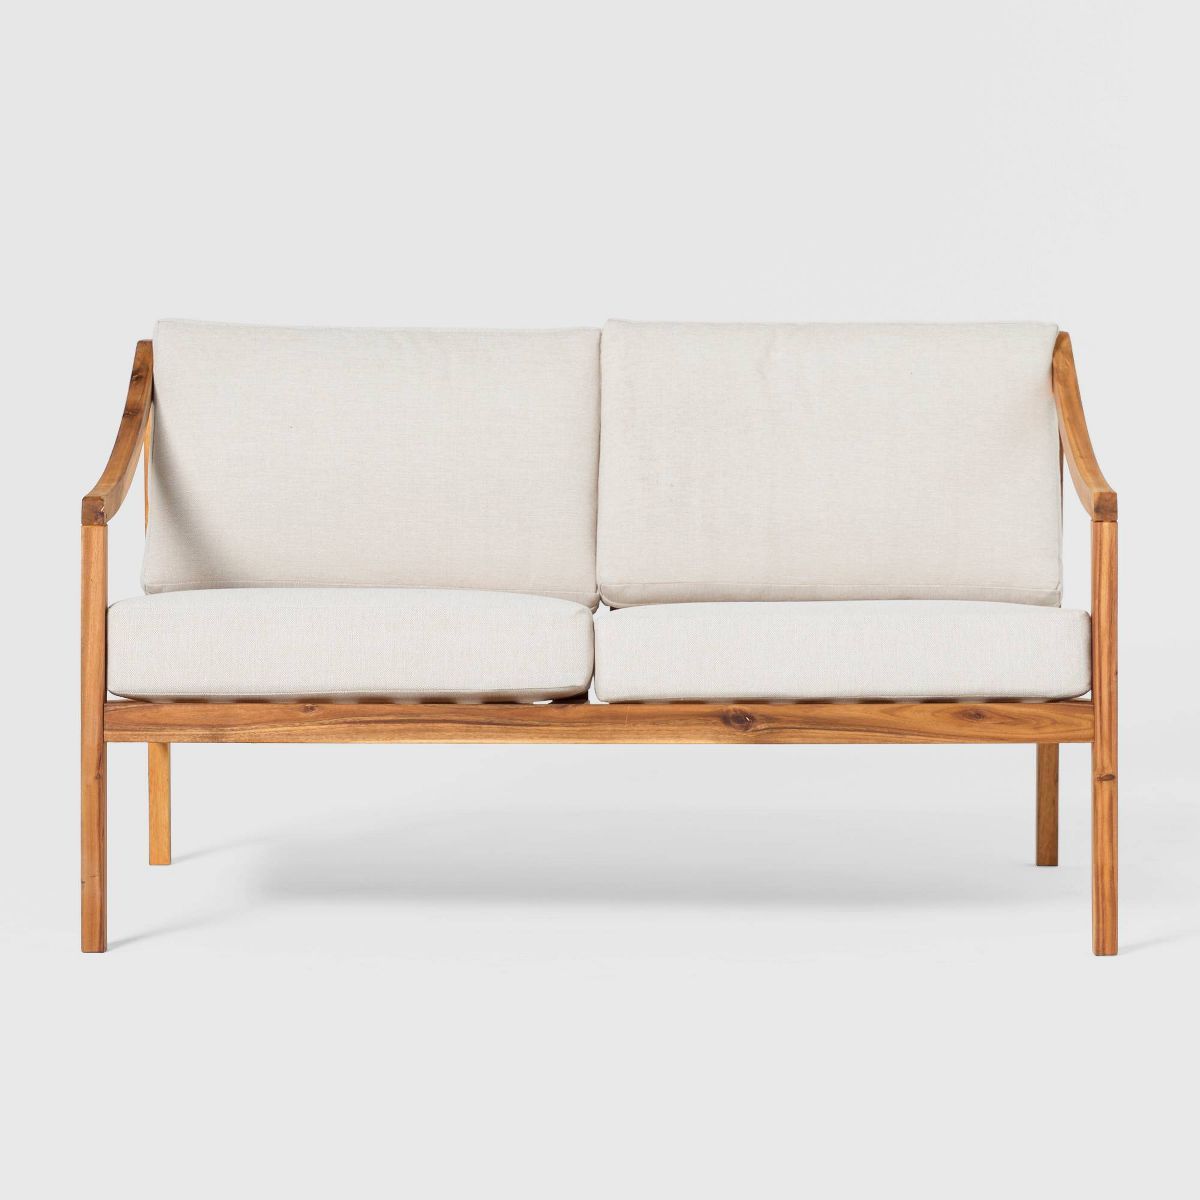 Saracina Home Mid-Century Modern Slatted Acacia Outdoor Bench with Cushions | Target